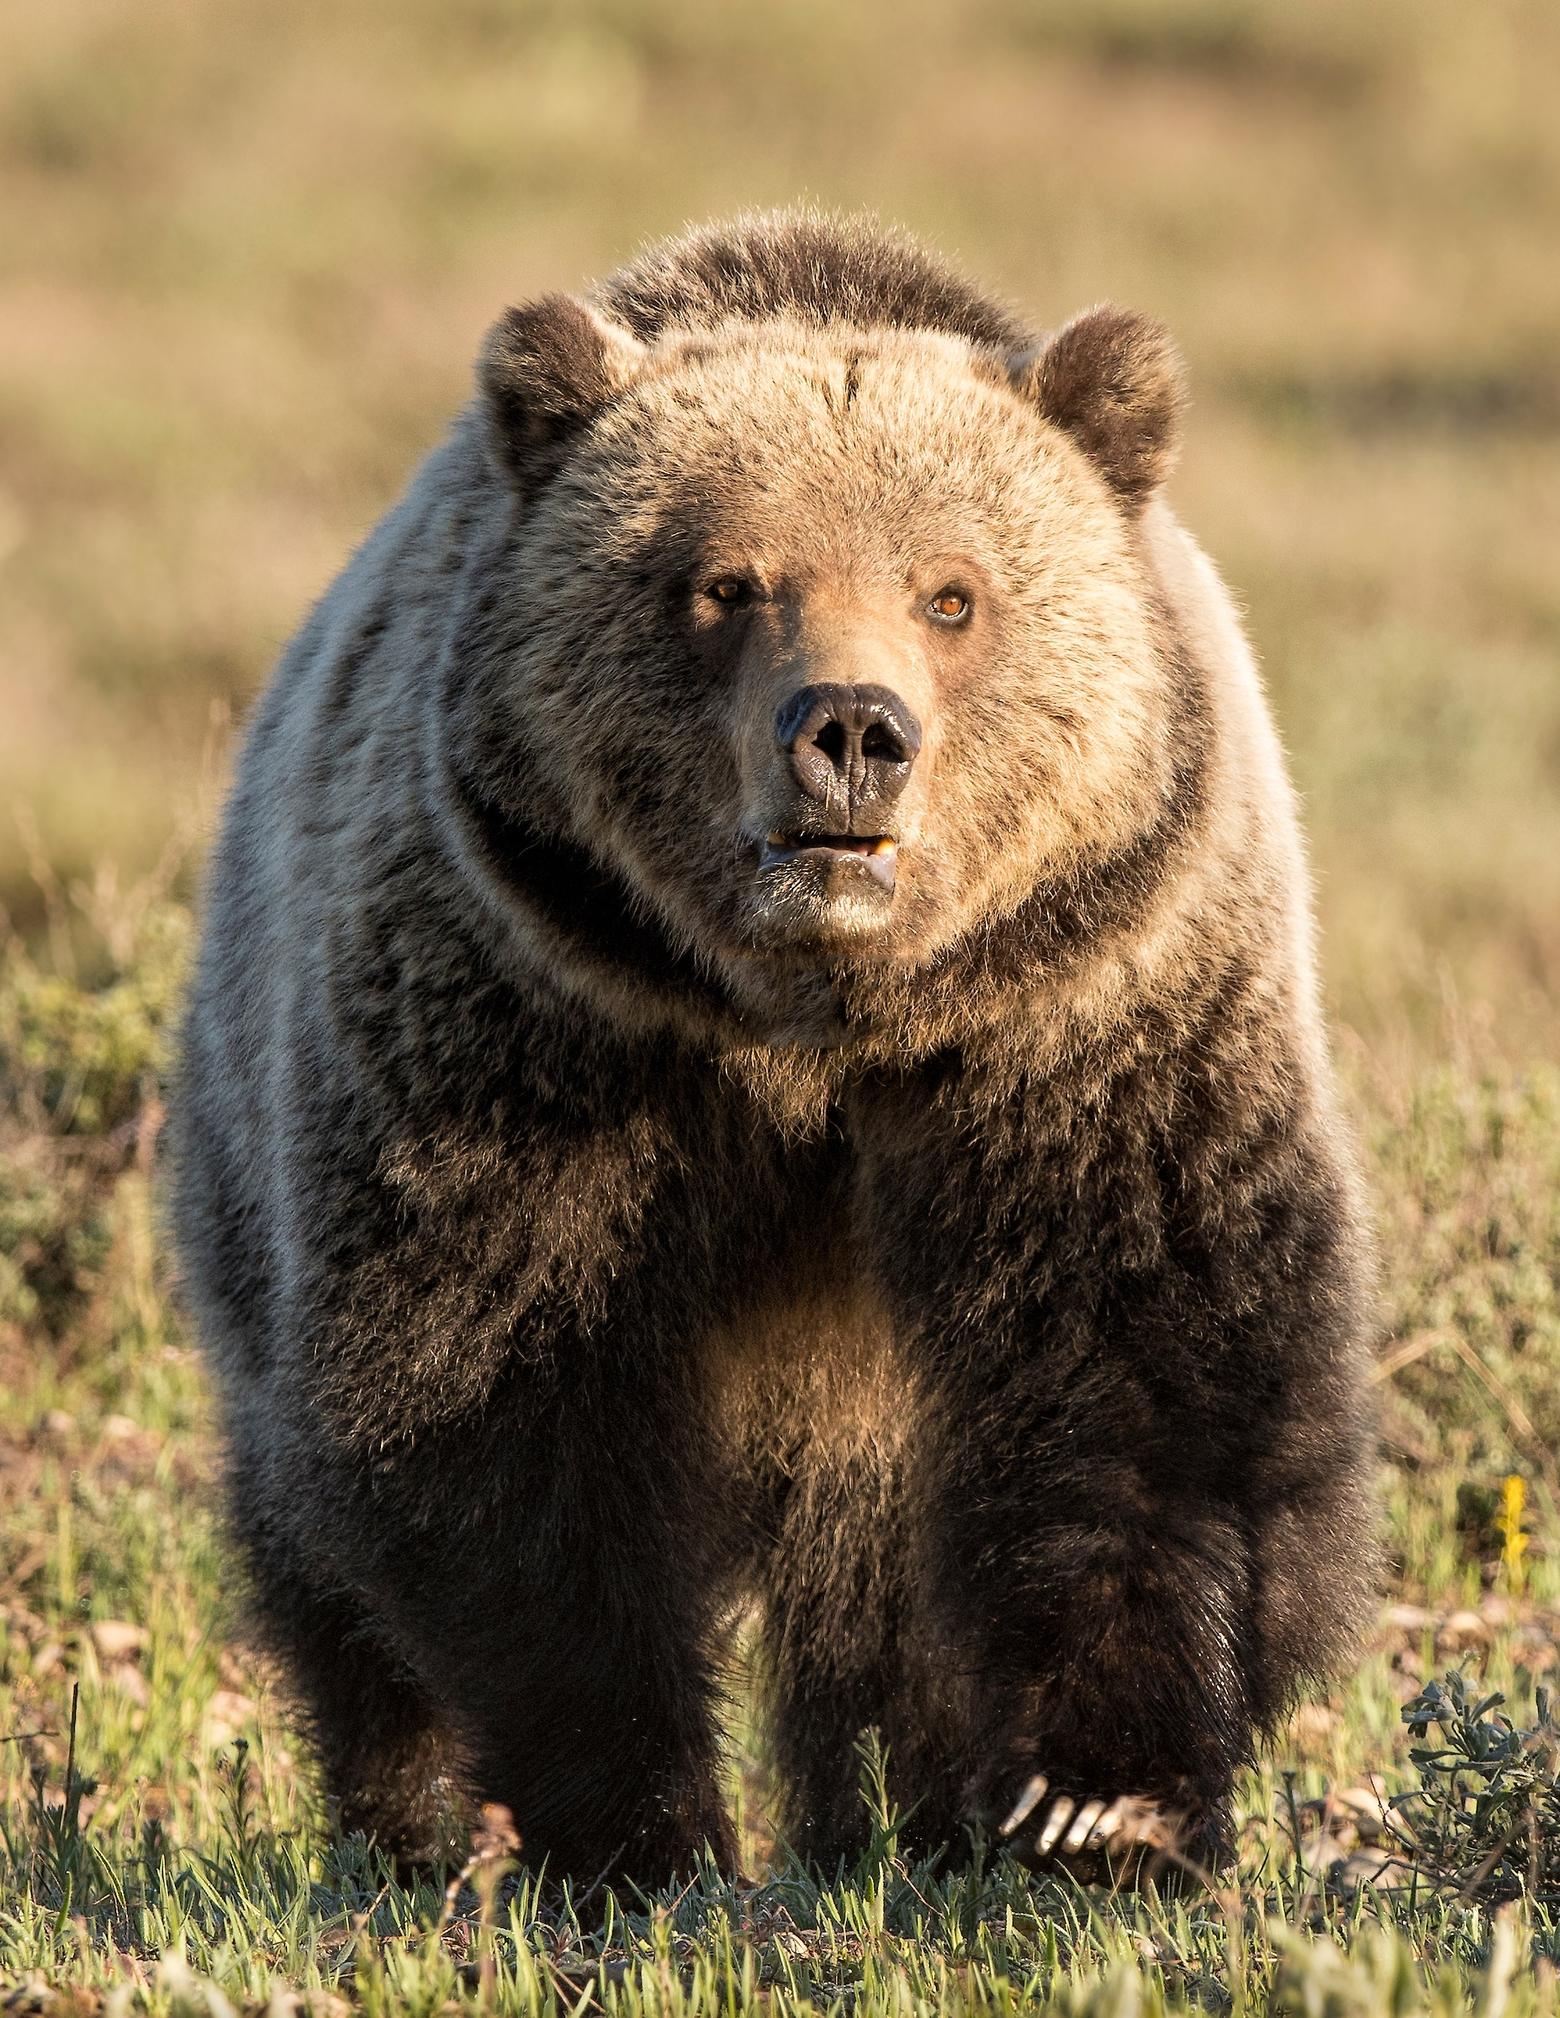 A male grizzly bear makes his way toward Charlie Lansche's camera in Greater Yellowstone. A charging grizzly can reach speeds up to 35 miles per hour and Keegan David found out how quickly he needed to reach and fire his canister of bear spray on May 20. Photo by Charlie M. Lansche